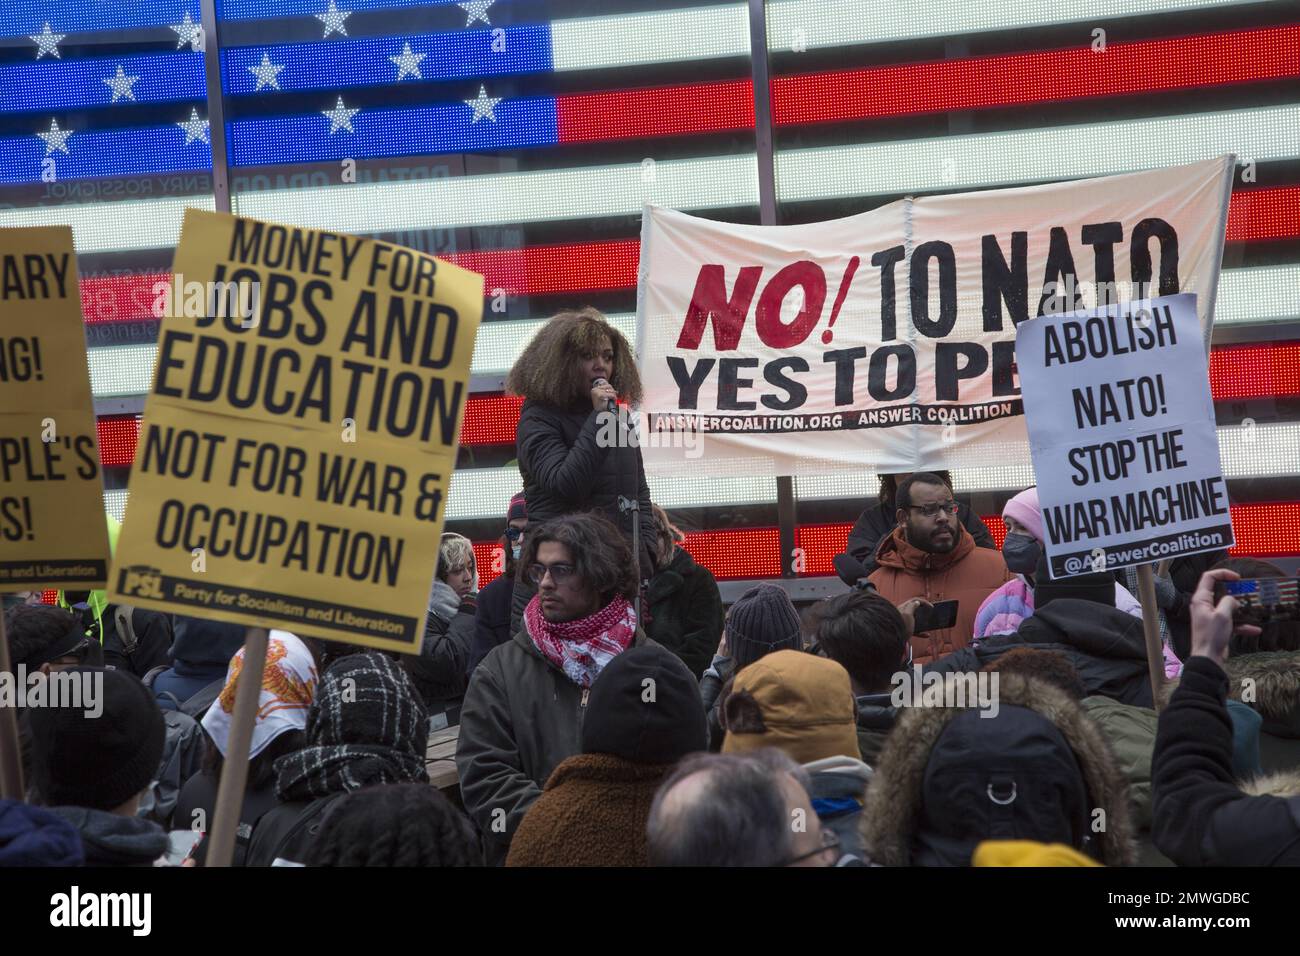 Peace activists and anti-militarists looking for negotiations in Ukraine rather than NATO escelating the war rally in Times Square in New York CIty during Martin Luther King Day weekend. Stock Photo